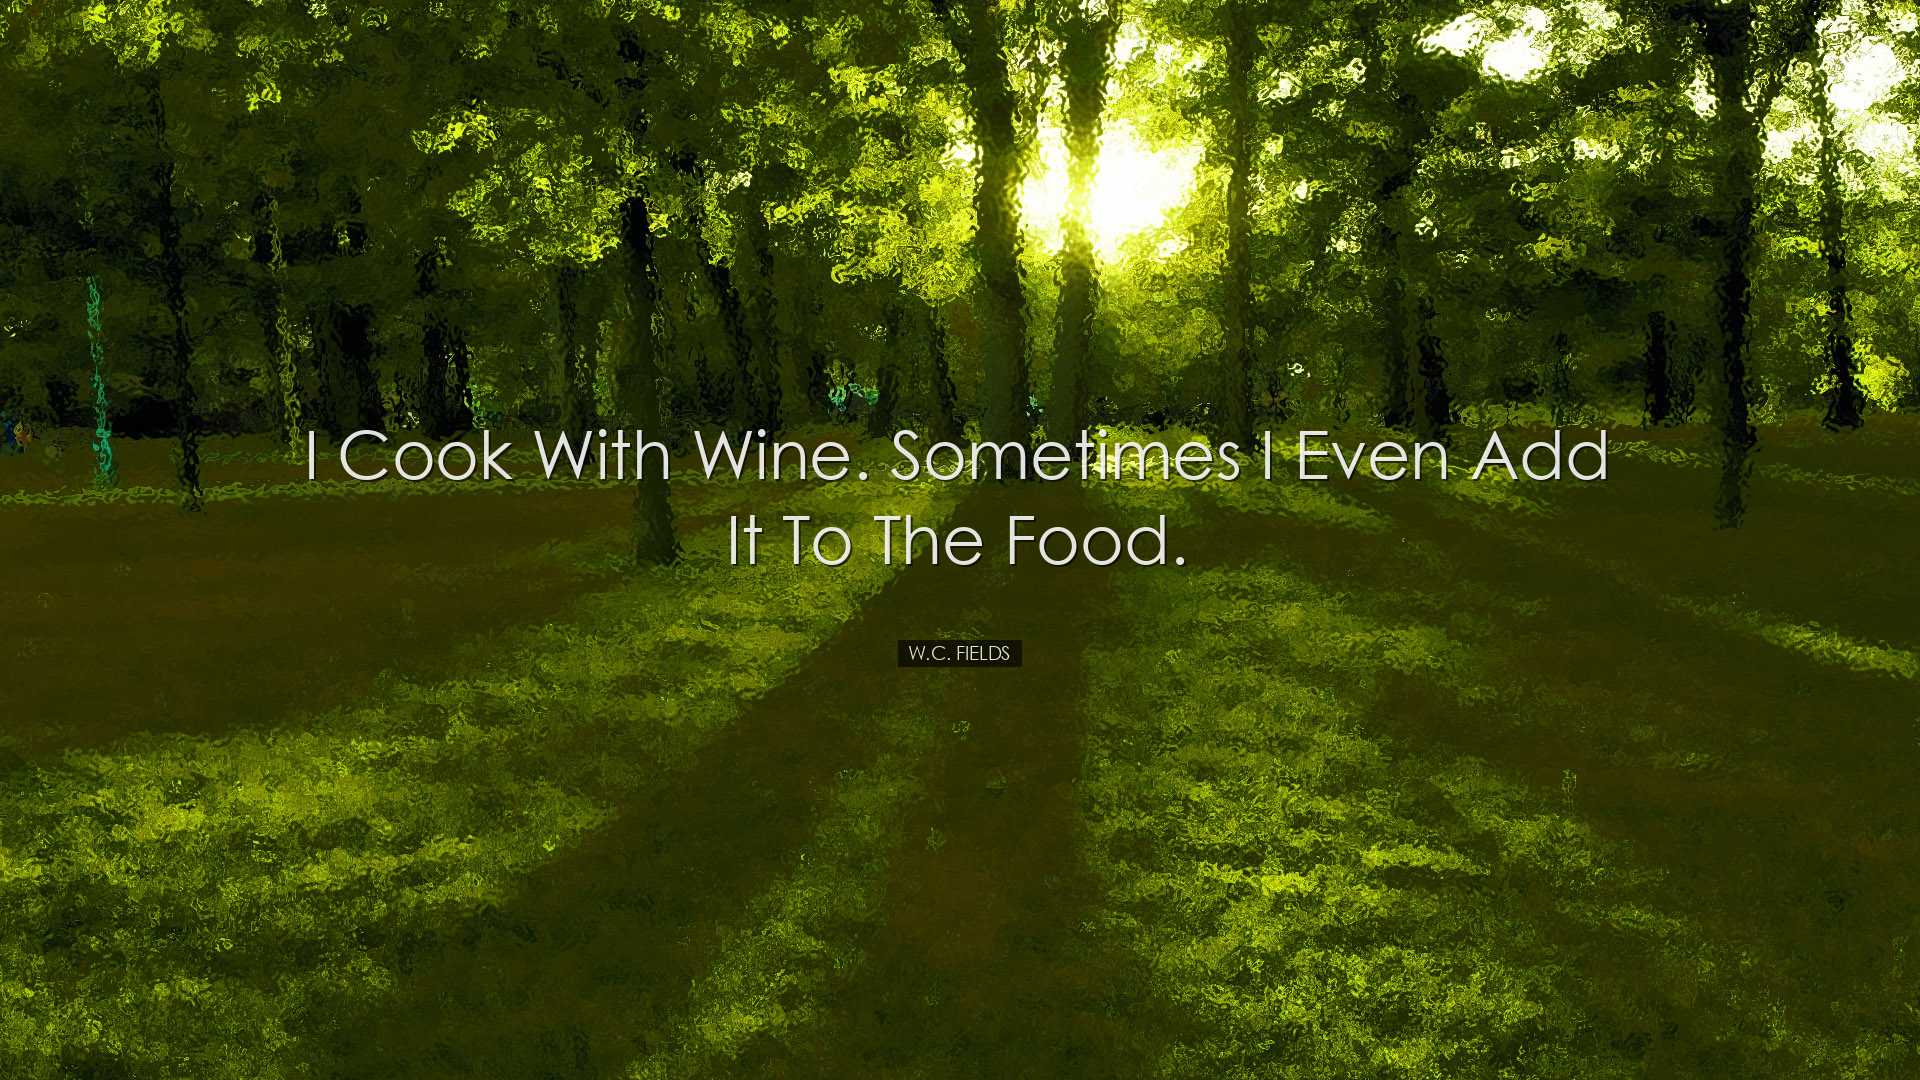 I cook with wine. Sometimes I even add it to the food. - W.C. Fiel